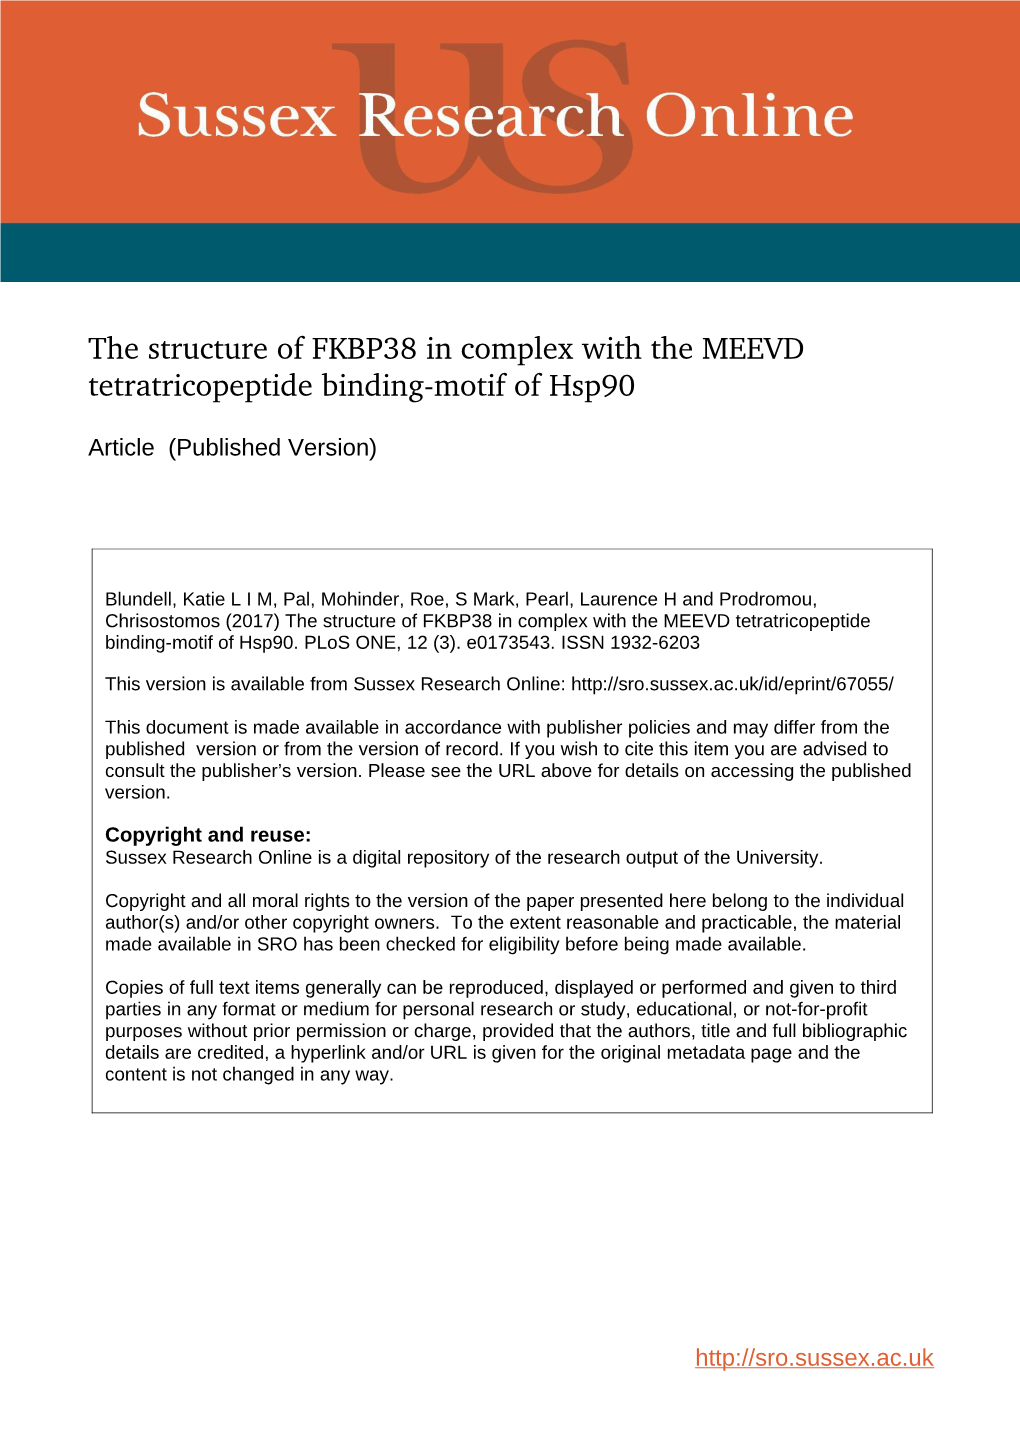 The Structure of FKBP38 in Complex with the MEEVD Tetratricopeptide Binding­Motif of Hsp90